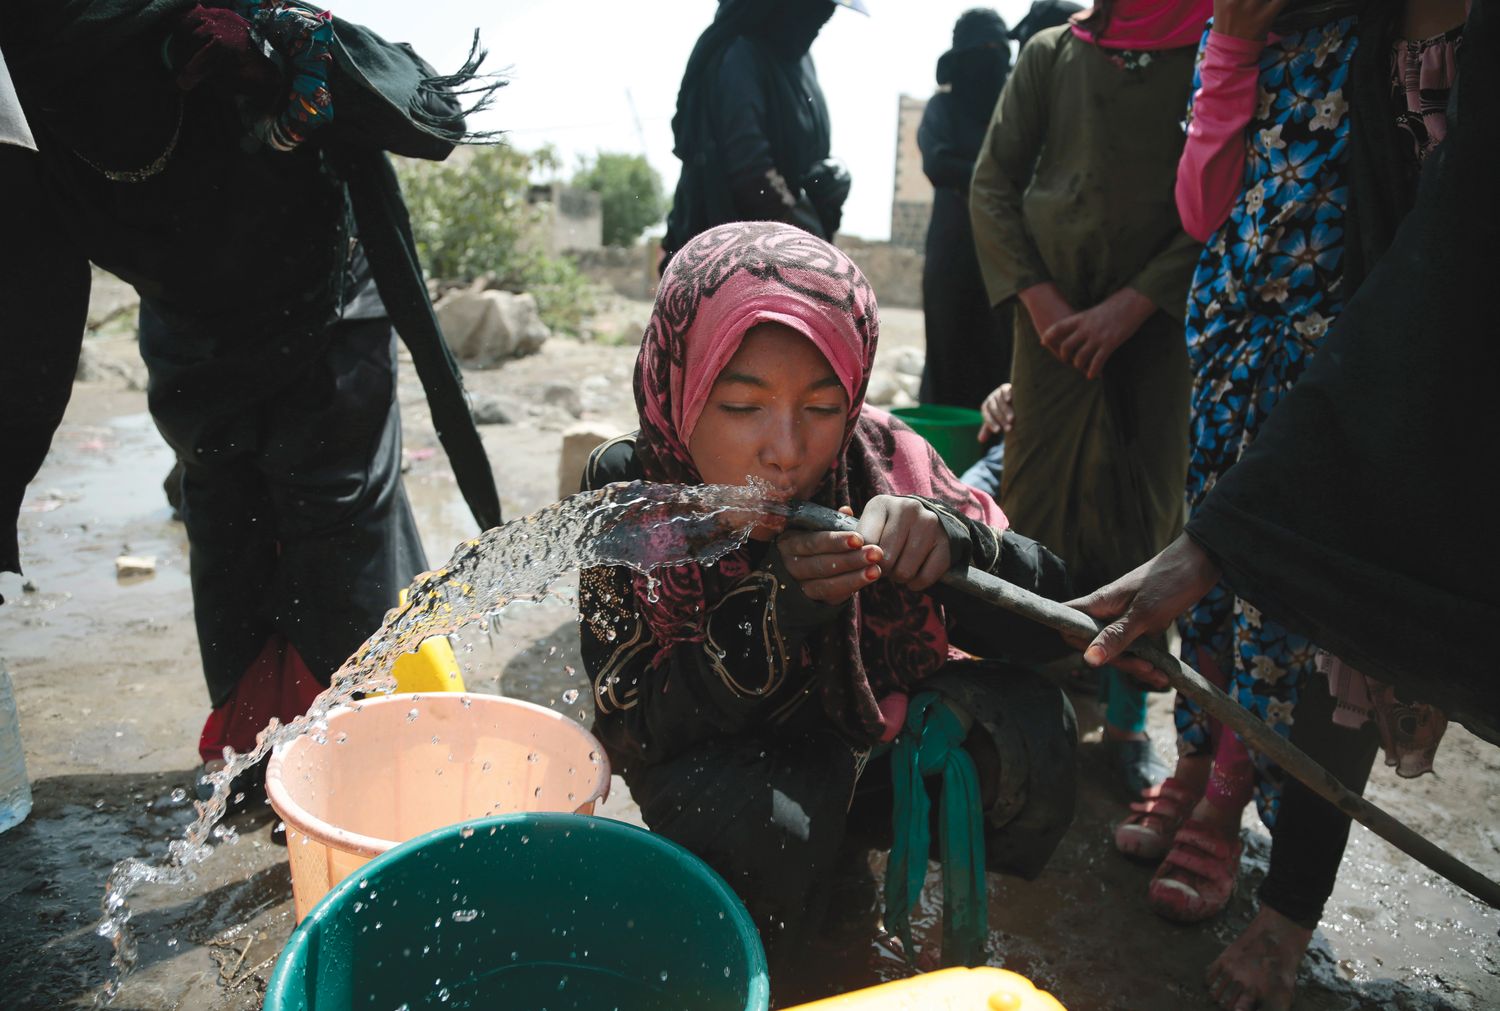  A GIRL DRINKS WATER ALLEGED TO CONTAIN THE BACTERIUM VIBRIO CHOLERA ON THE OUTSKIRTS OF SANAA, YEMEN (ASSOCIATED PRESS PHOTO).